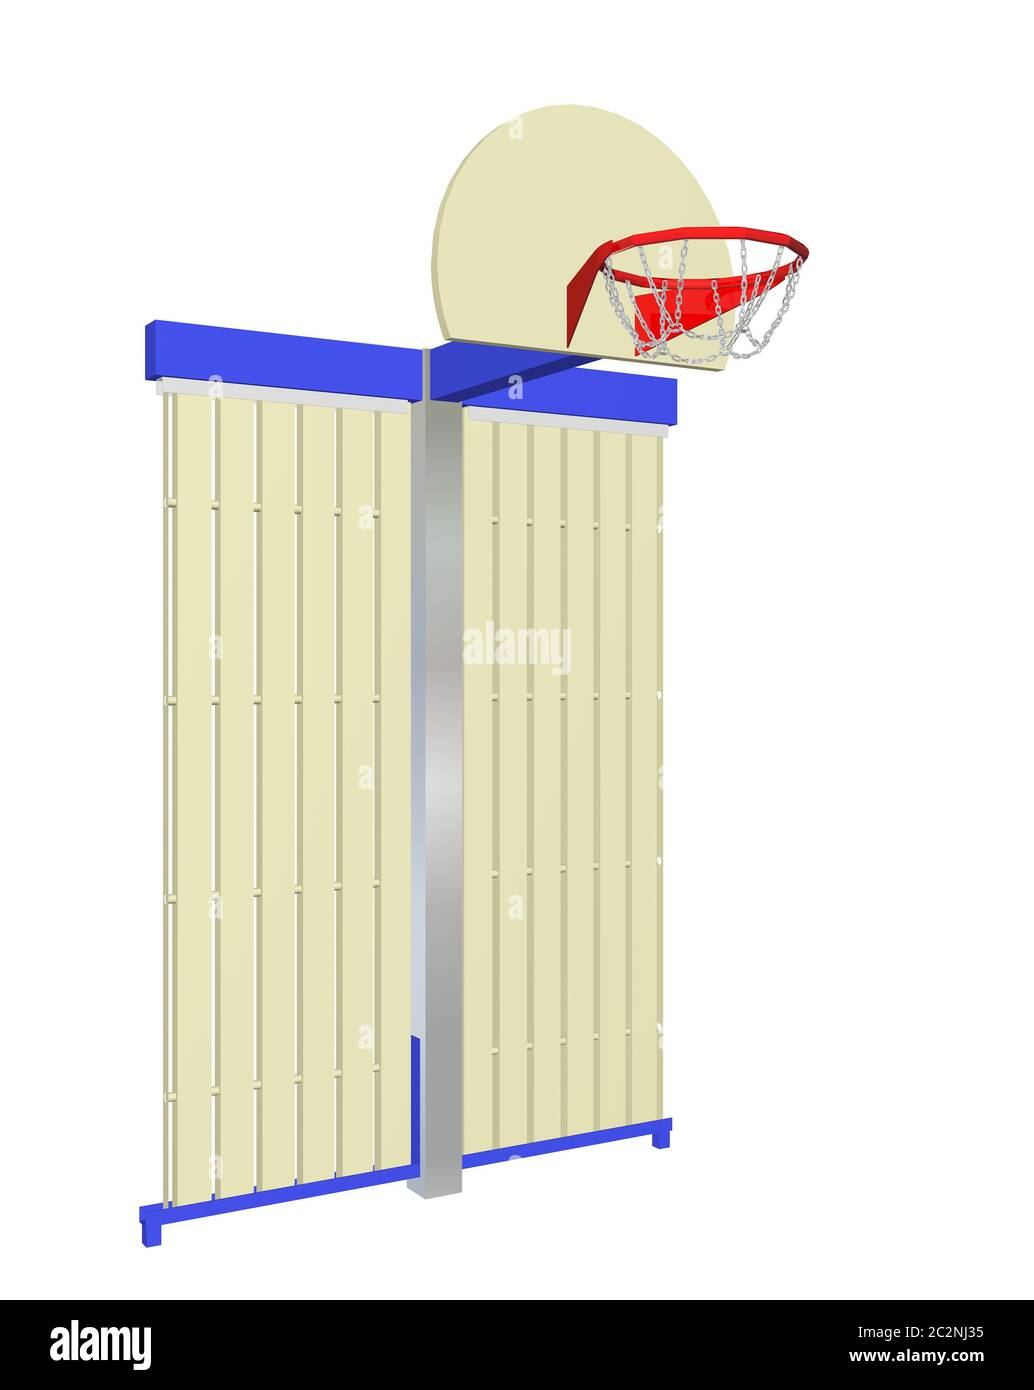 Red, blue and beige wall-mounted basketball goal with protective backing, isolated against a white background Stock Photo